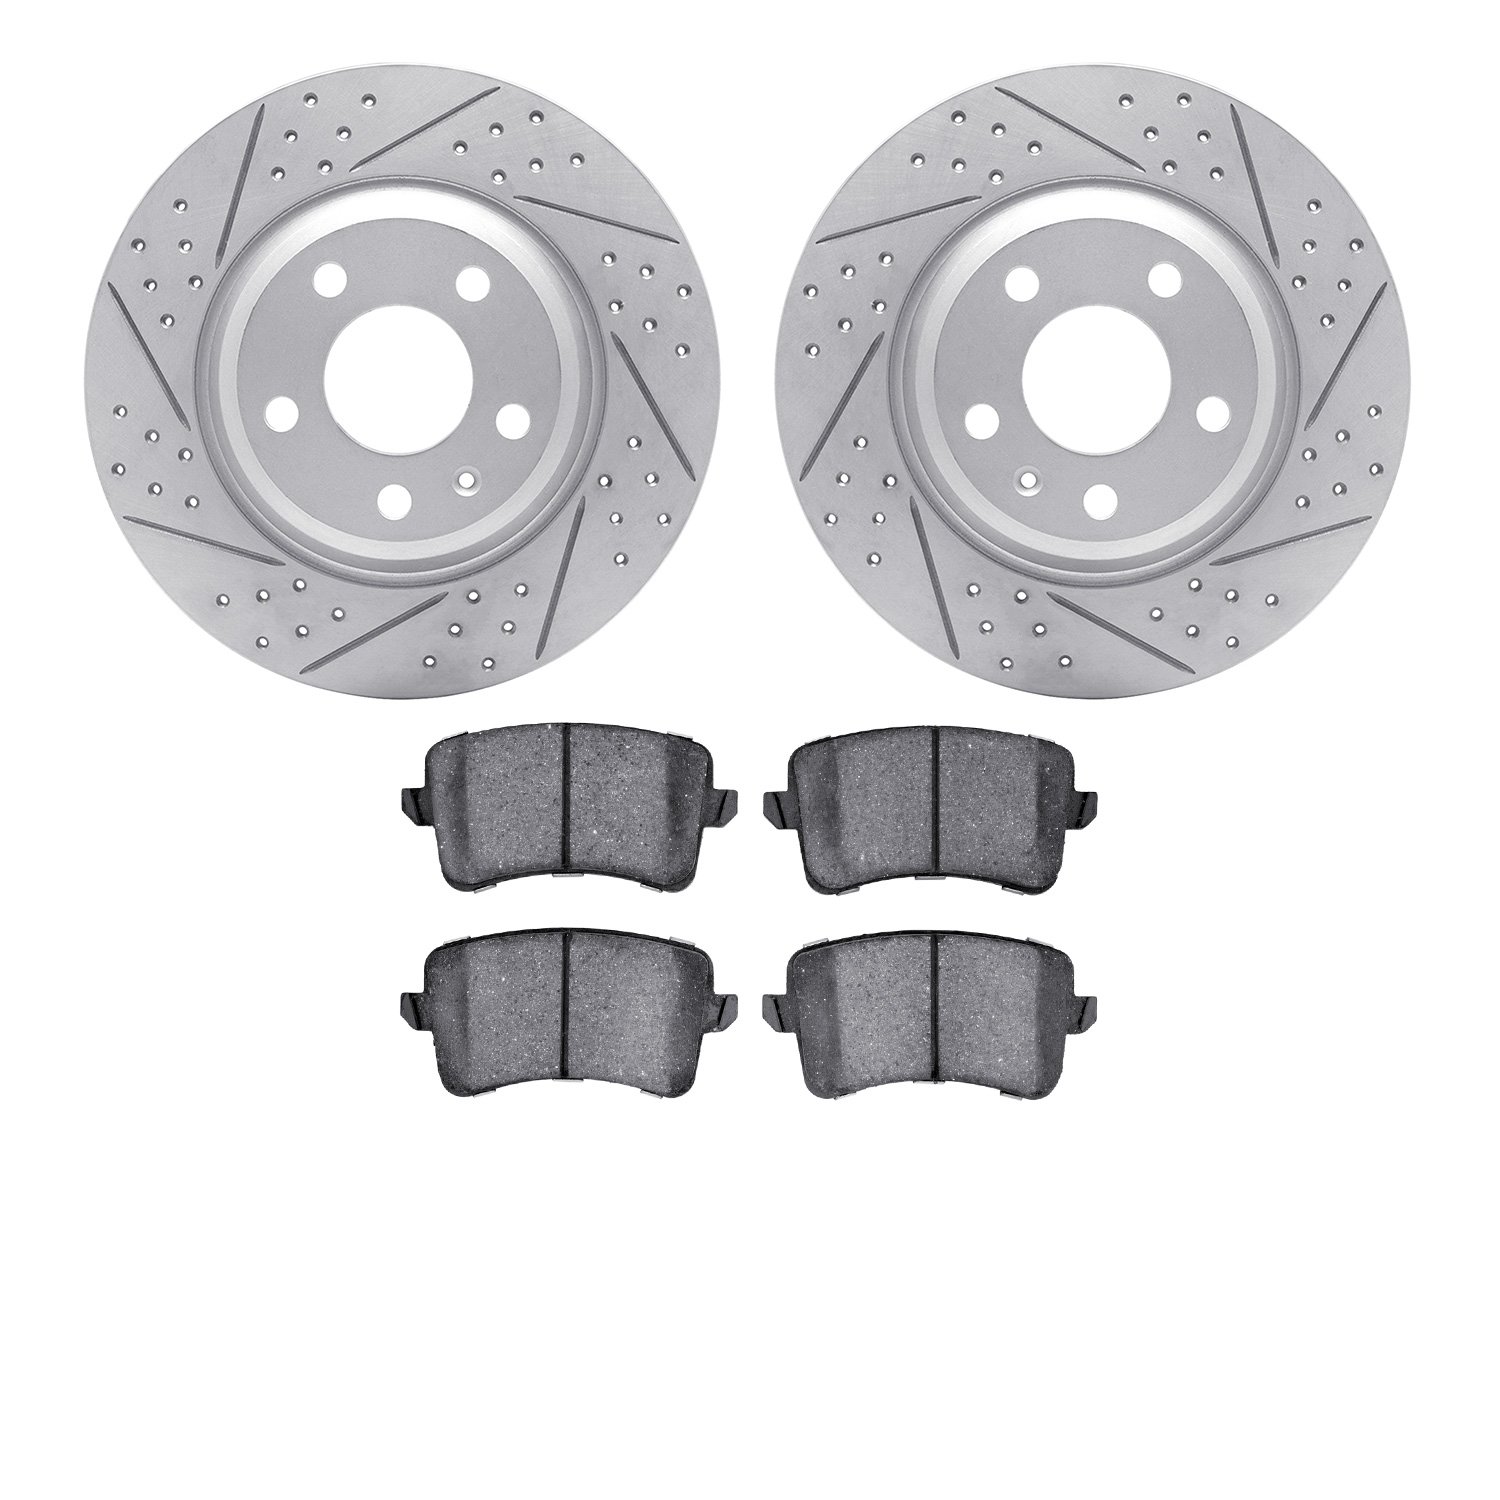 2502-73069 Geoperformance Drilled/Slotted Rotors w/5000 Advanced Brake Pads Kit, 2012-2017 Audi/Volkswagen, Position: Rear